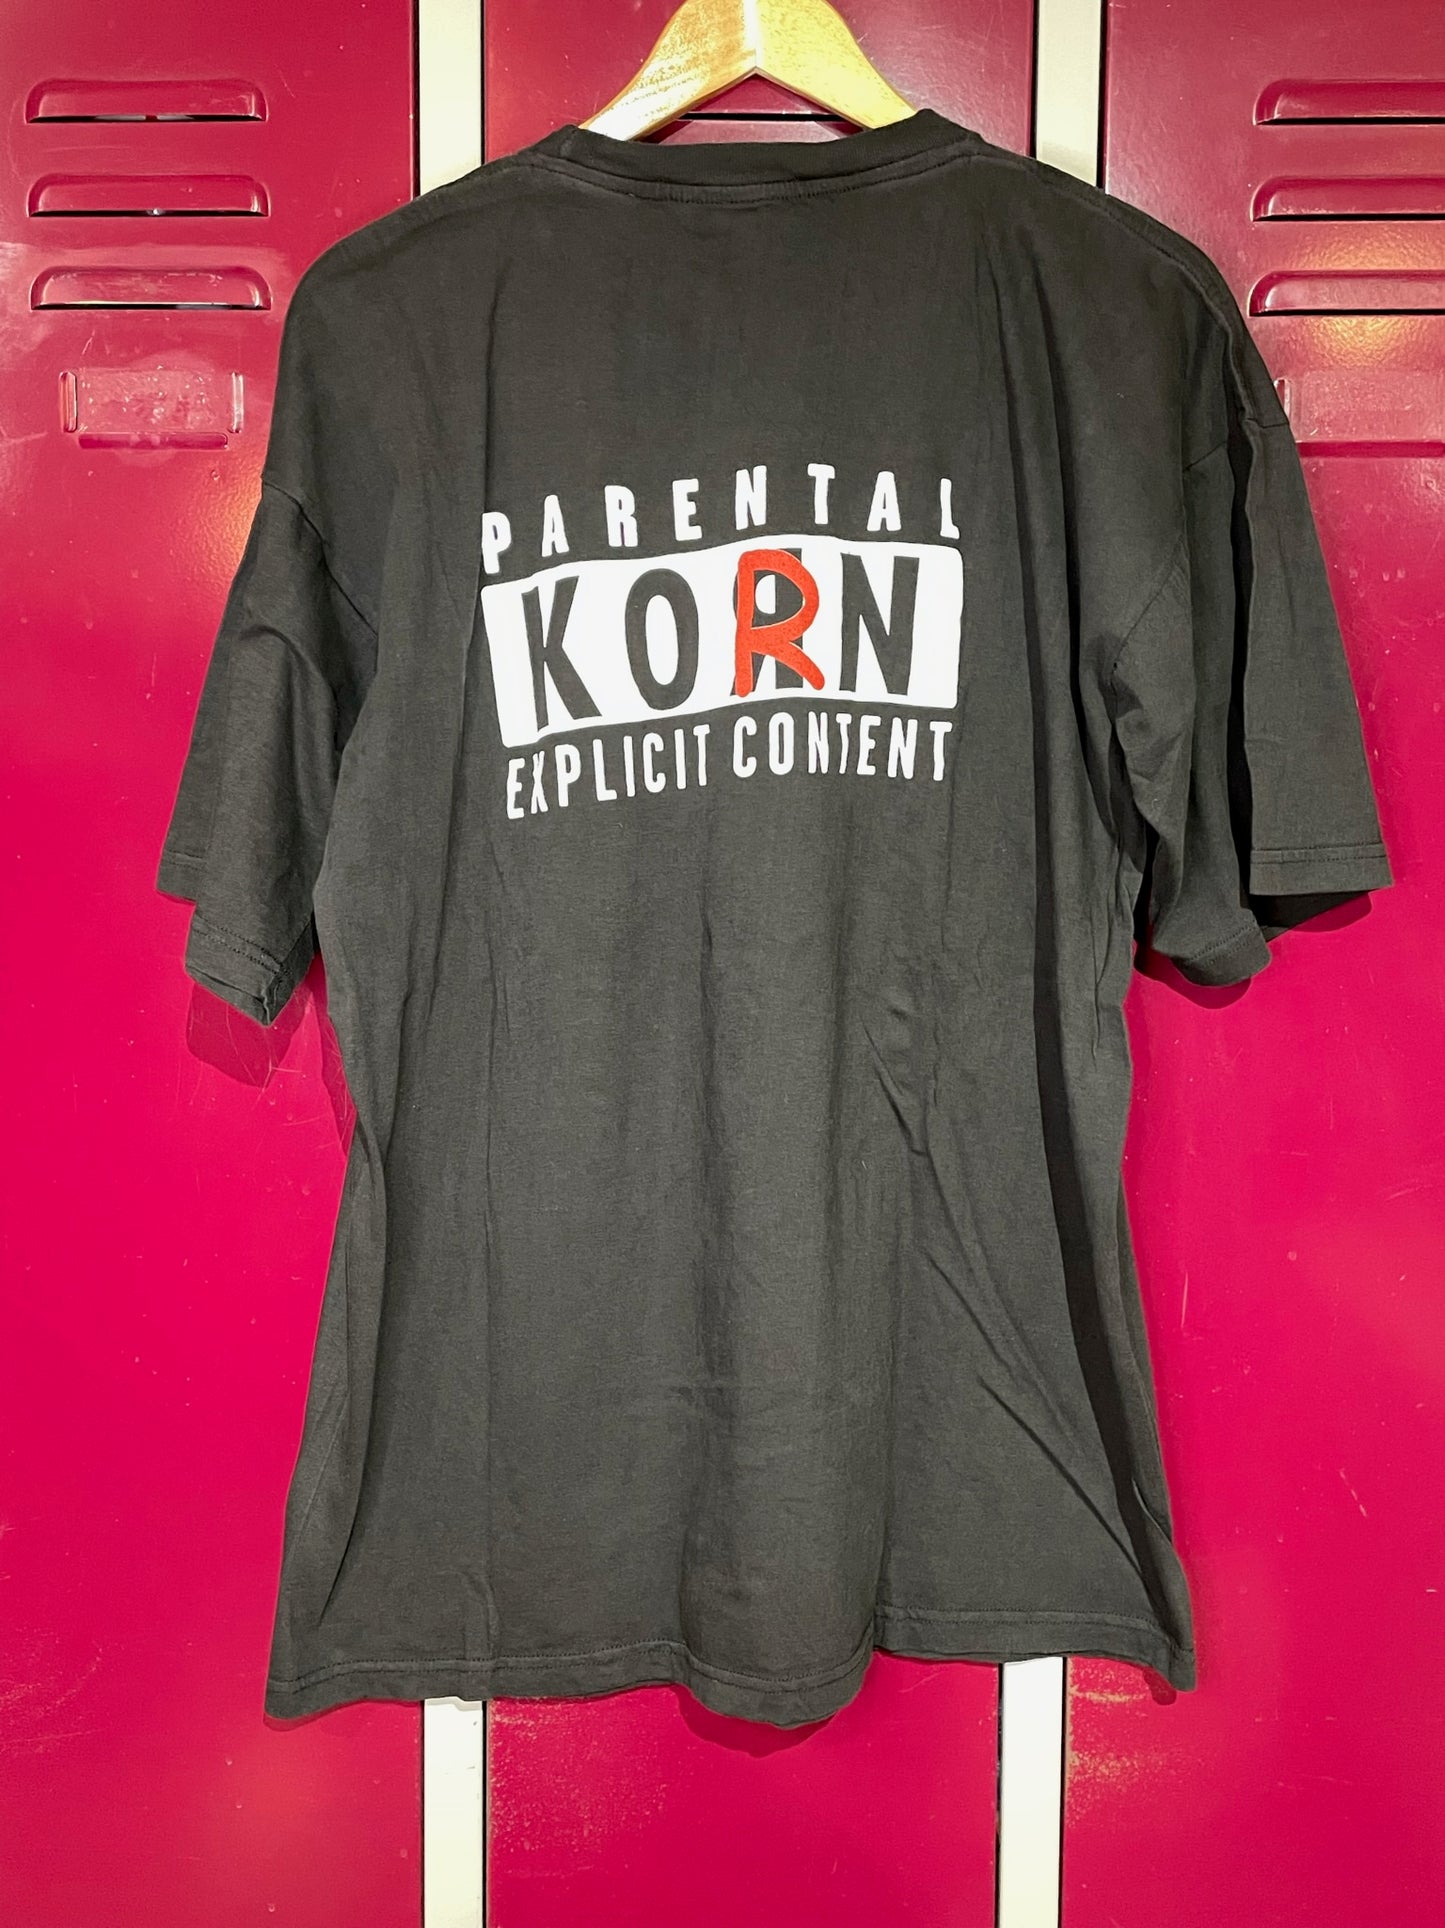 KORN "TAKE A LOOK IN THE MIRROR" 2004 MUSIC BAND T-SHIRT  SZ: XL